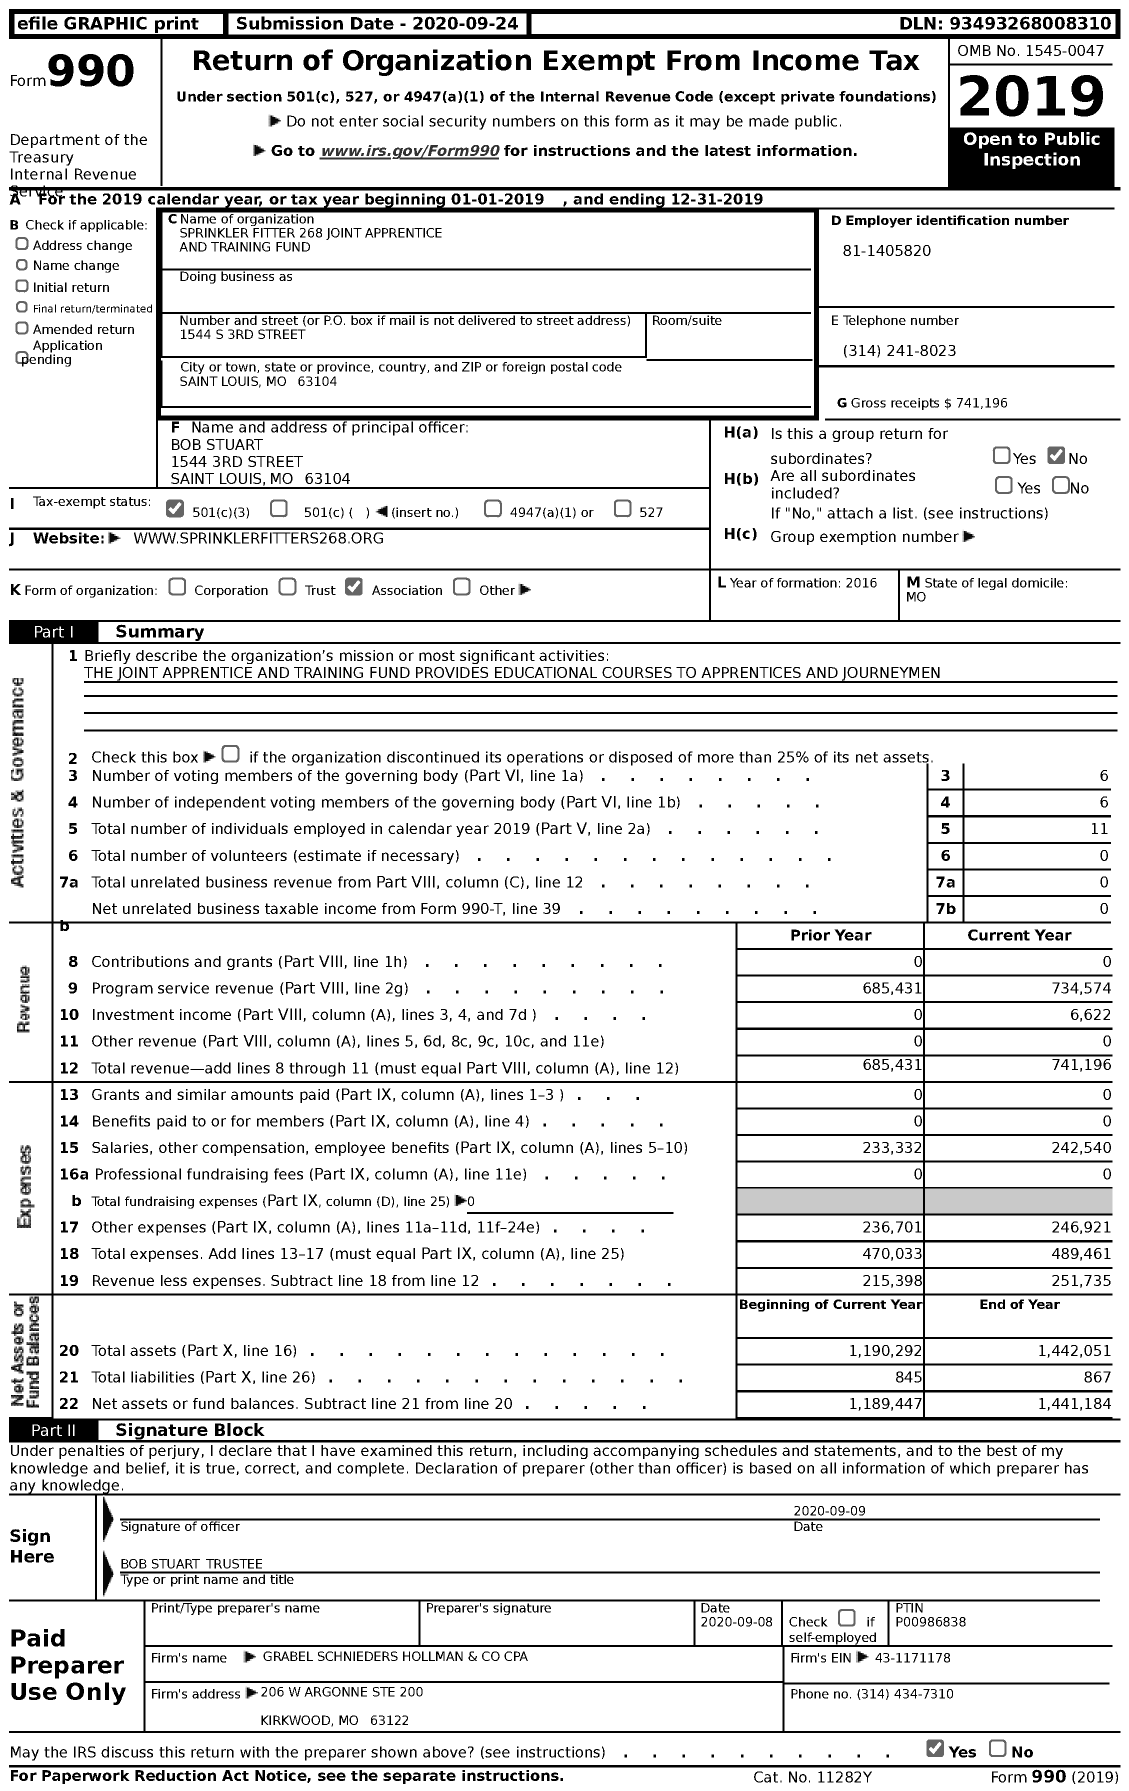 Image of first page of 2019 Form 990 for Sprinkler Fitter 268 Joint Apprentice and Training Fund